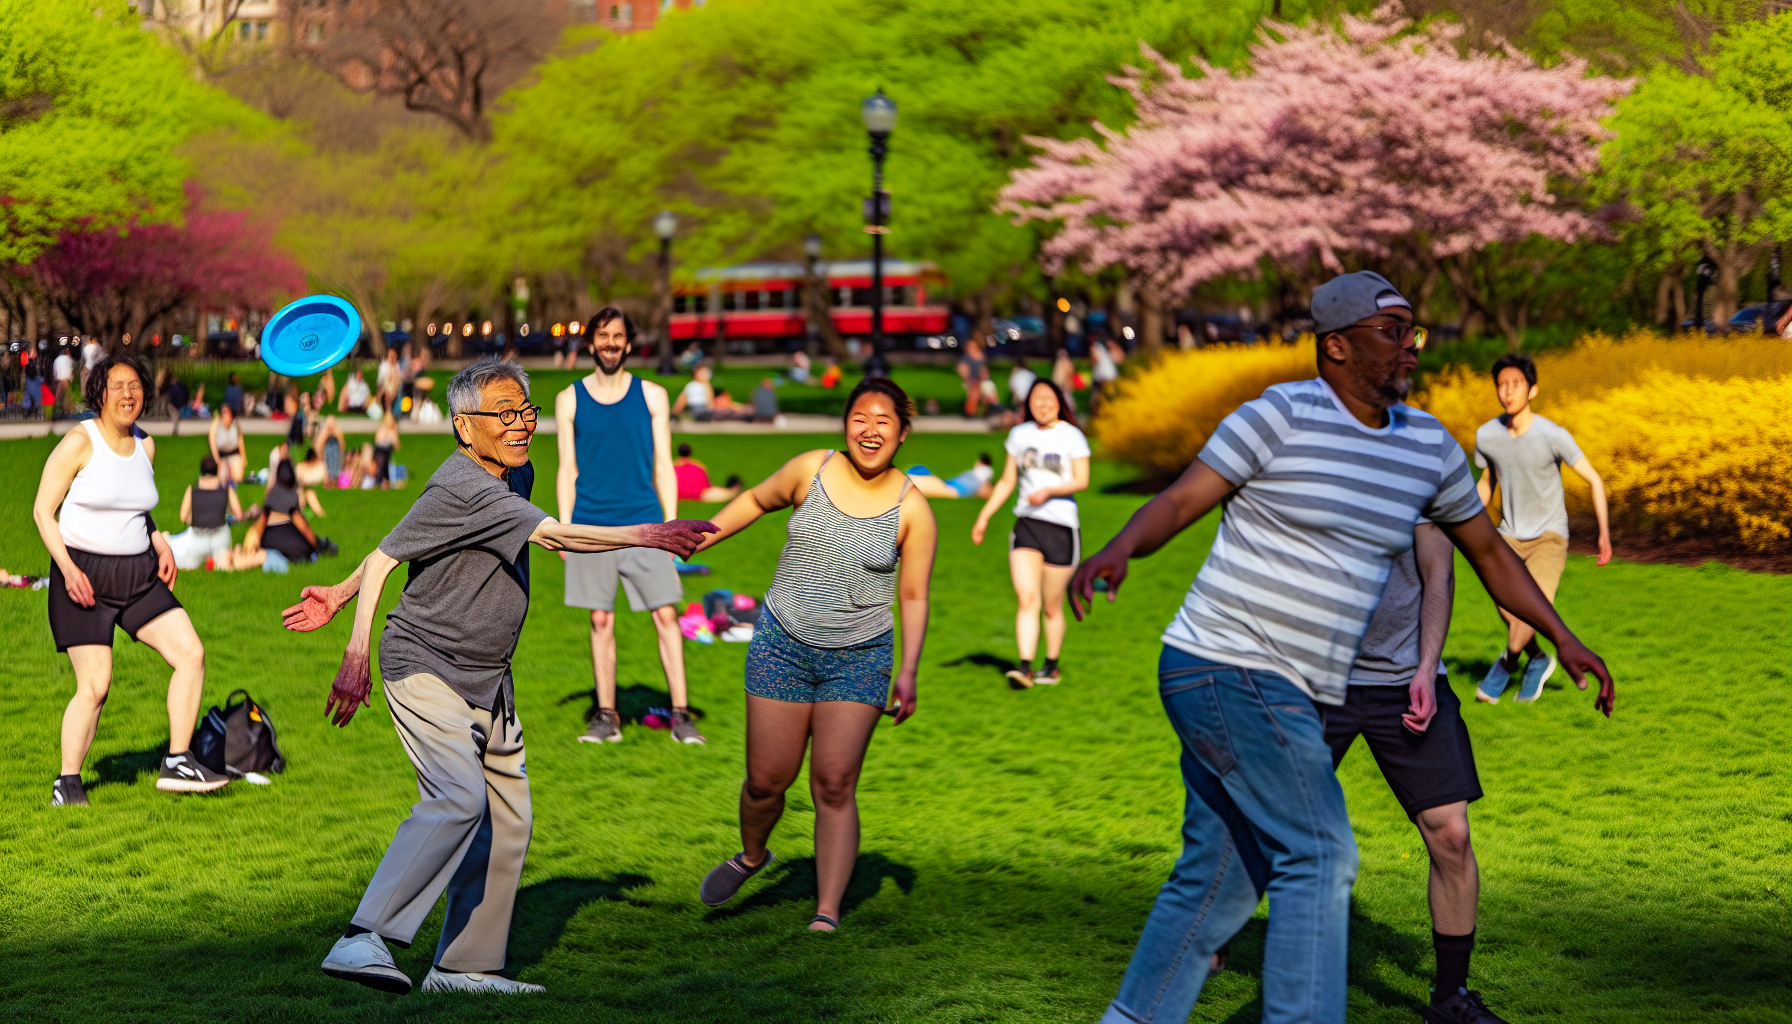 A group of people playing outdoor games in a park